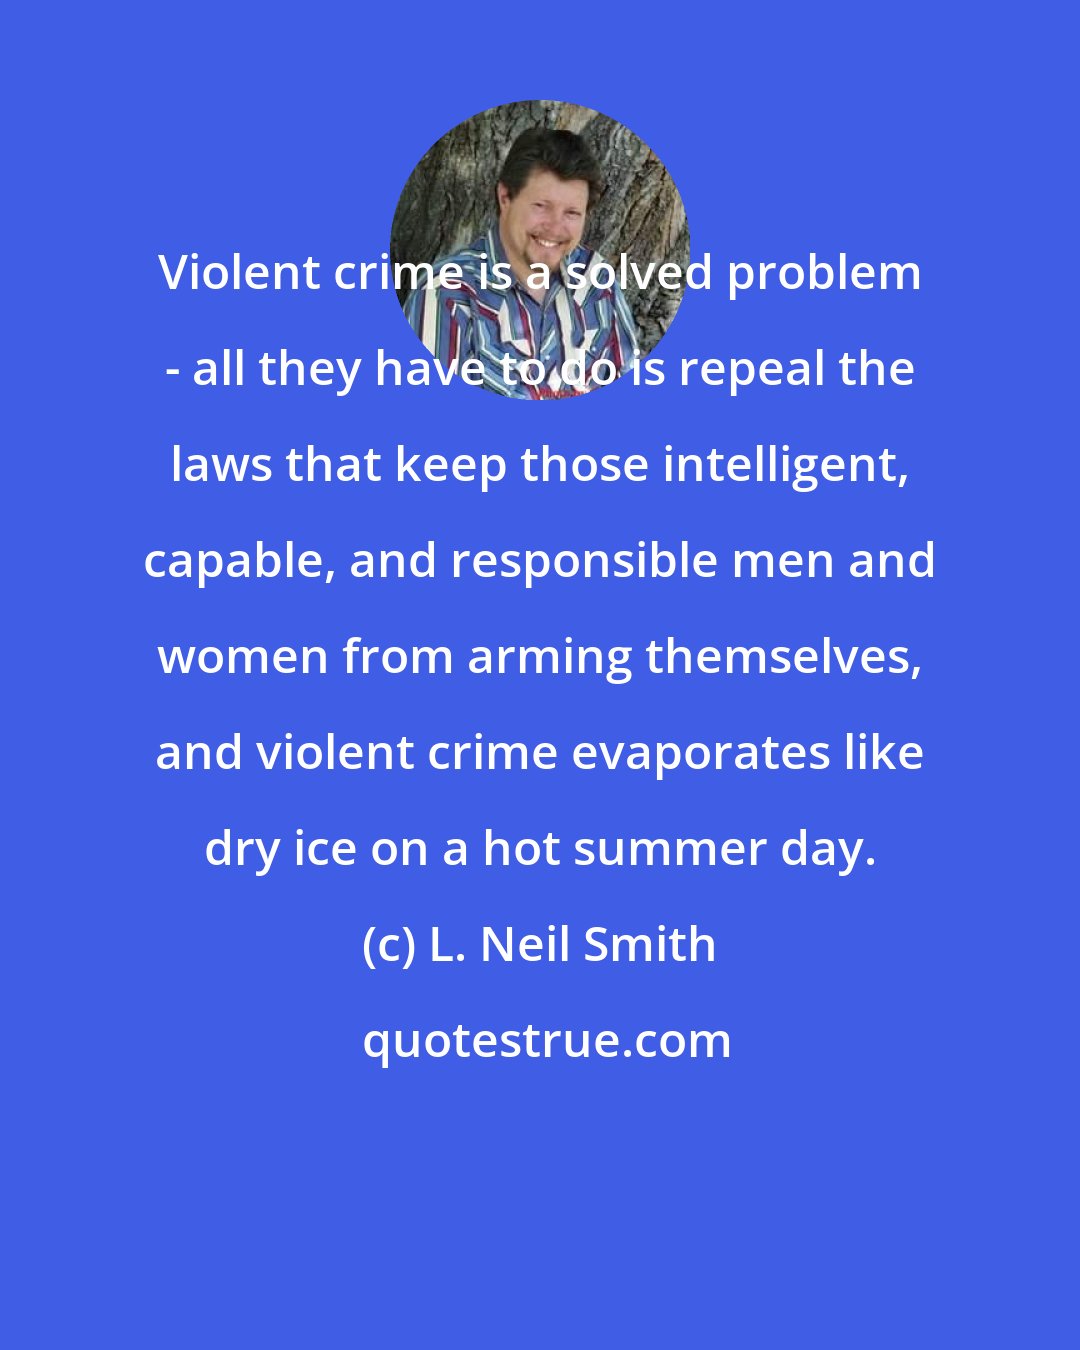 L. Neil Smith: Violent crime is a solved problem - all they have to do is repeal the laws that keep those intelligent, capable, and responsible men and women from arming themselves, and violent crime evaporates like dry ice on a hot summer day.